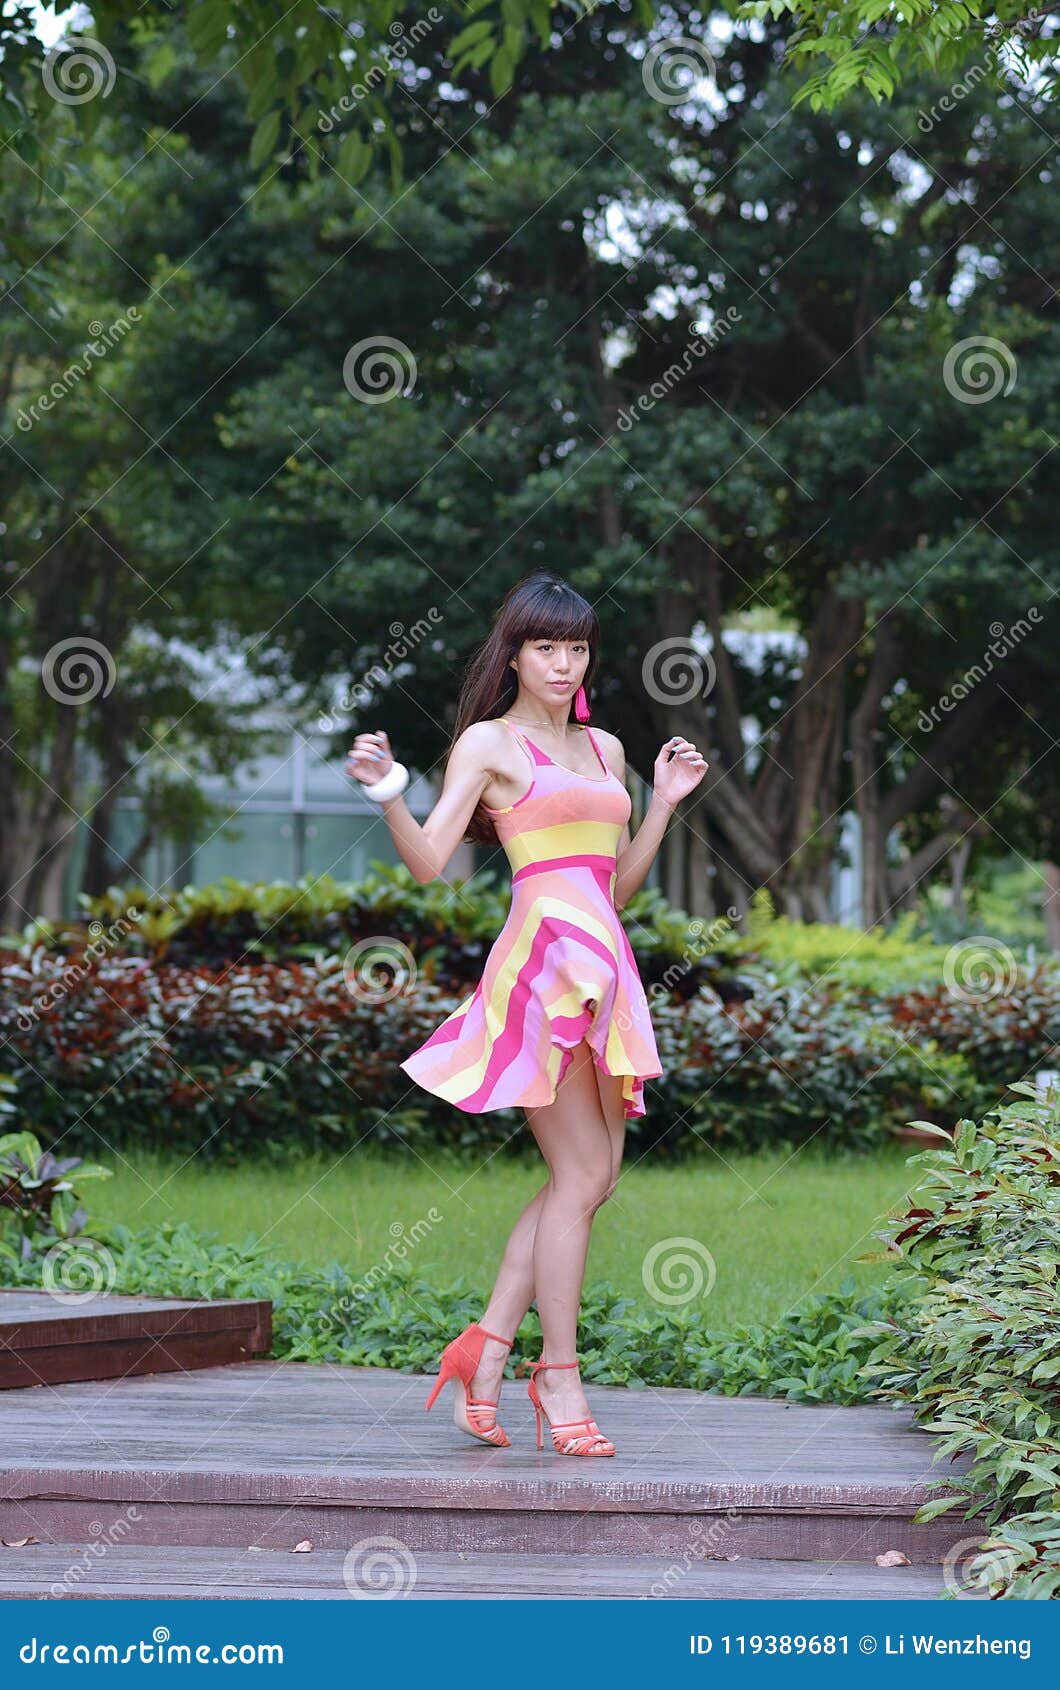 Beautiful And Sex Asian Girl Shows Her Youth In The Park Stock Image Image Of Asian Sweet